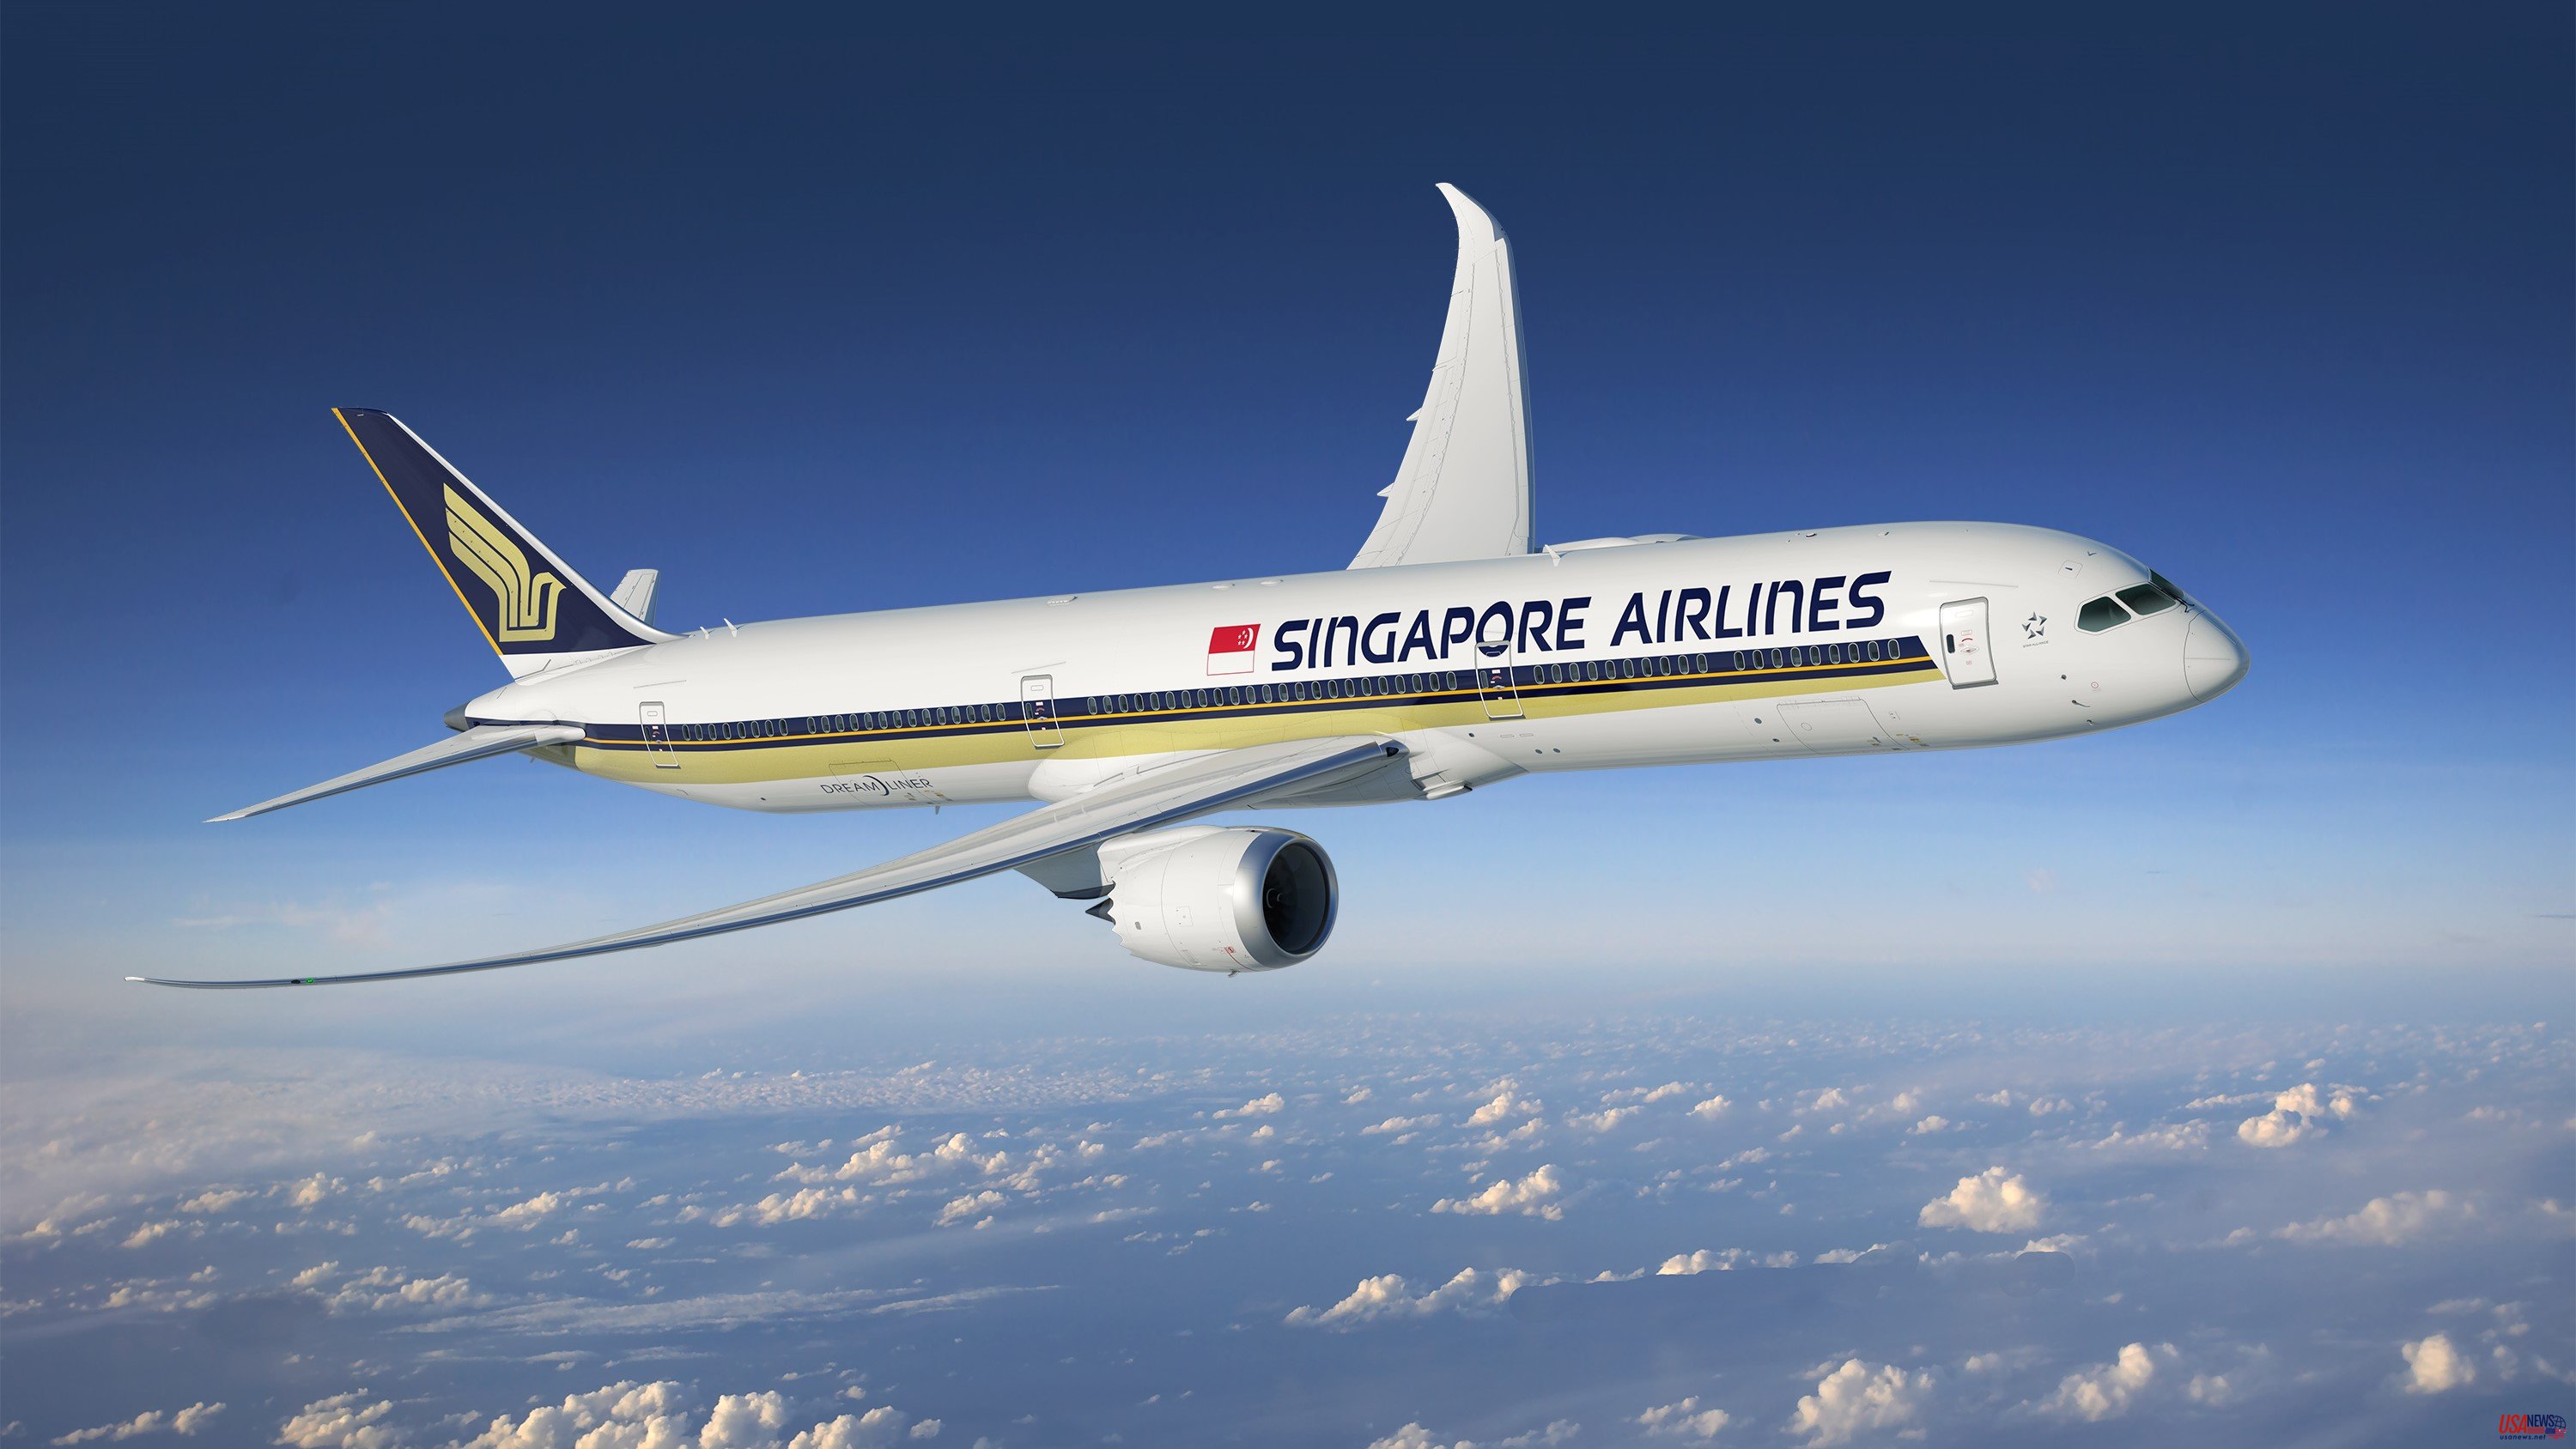 Singapore Airlines has plans to have a fully-vaccinated crew